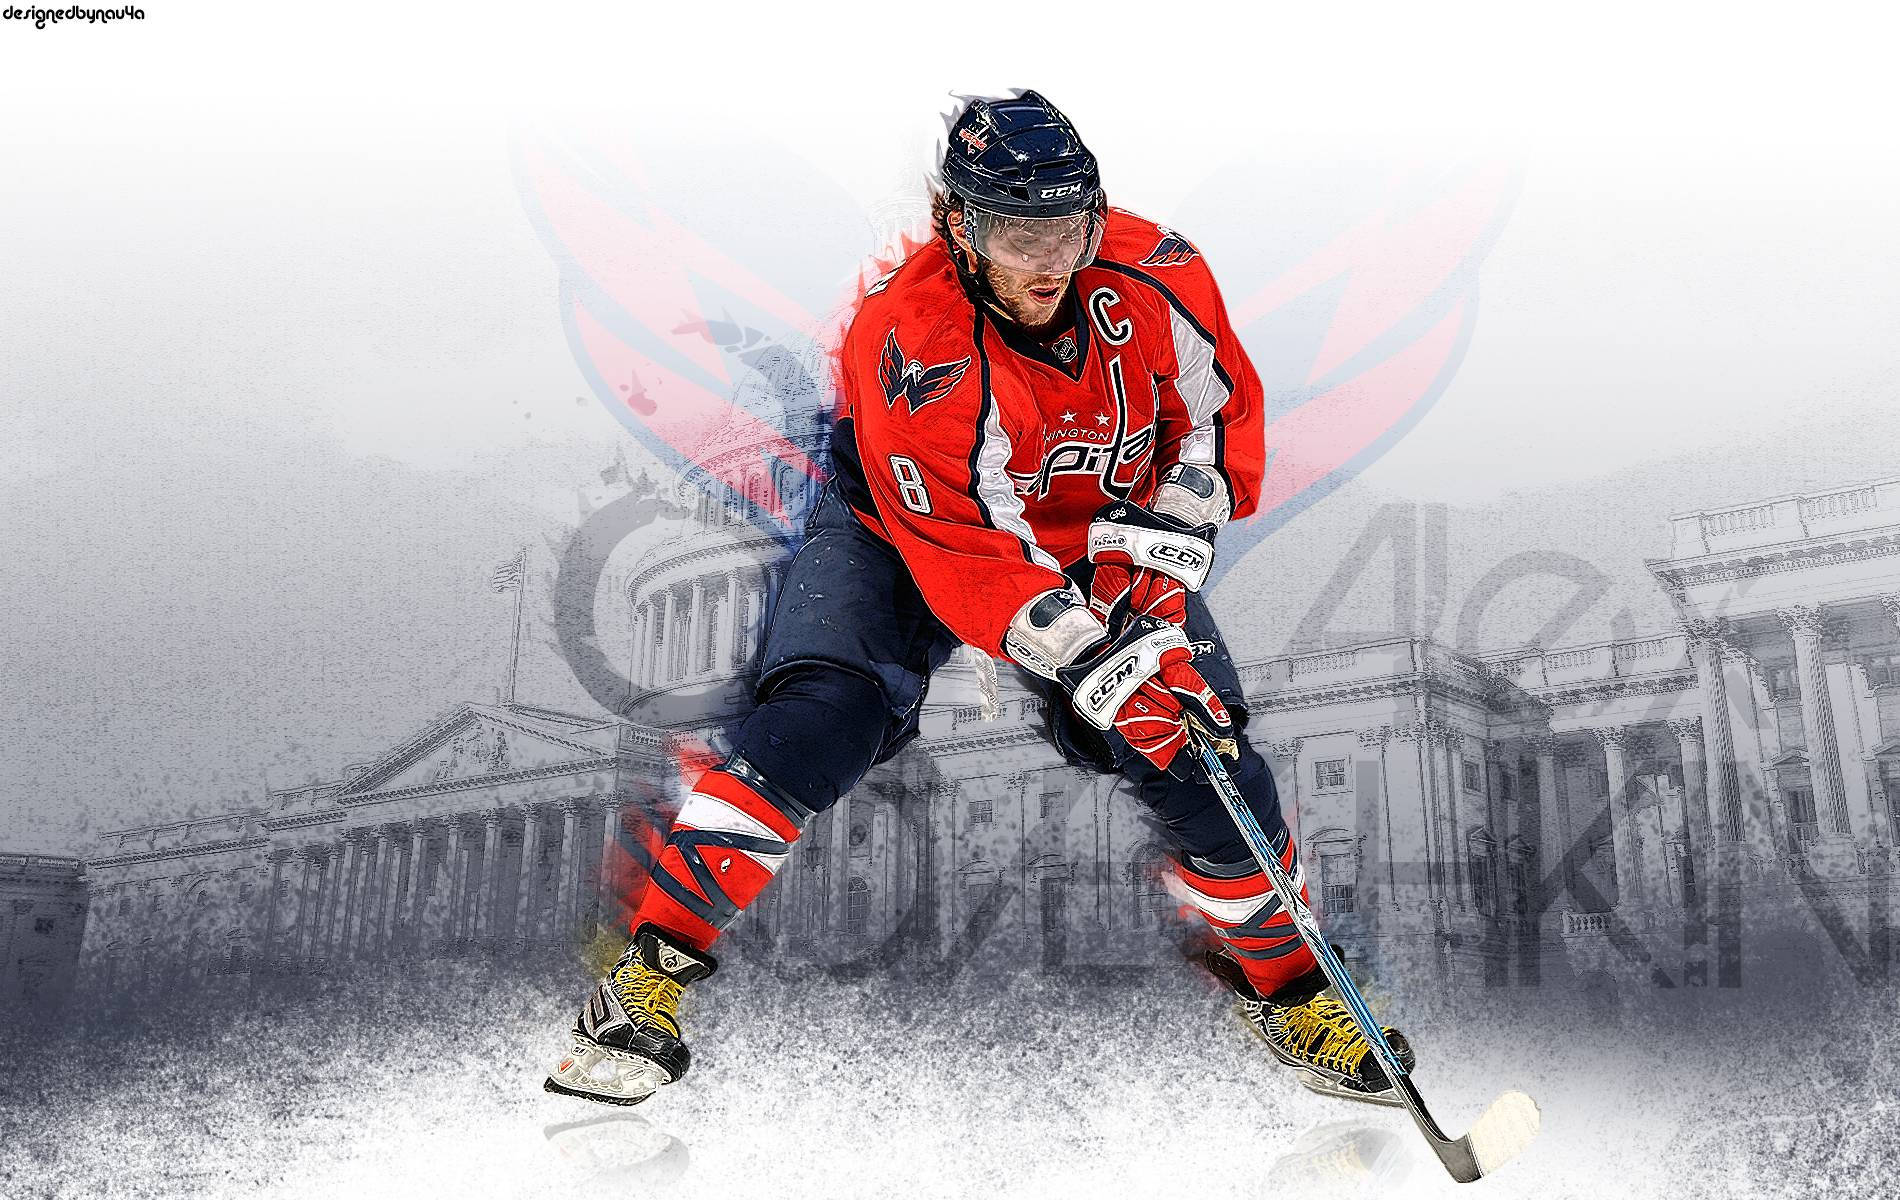 Download Alex Ovechkin 2018 Stanley Cup Wallpaper